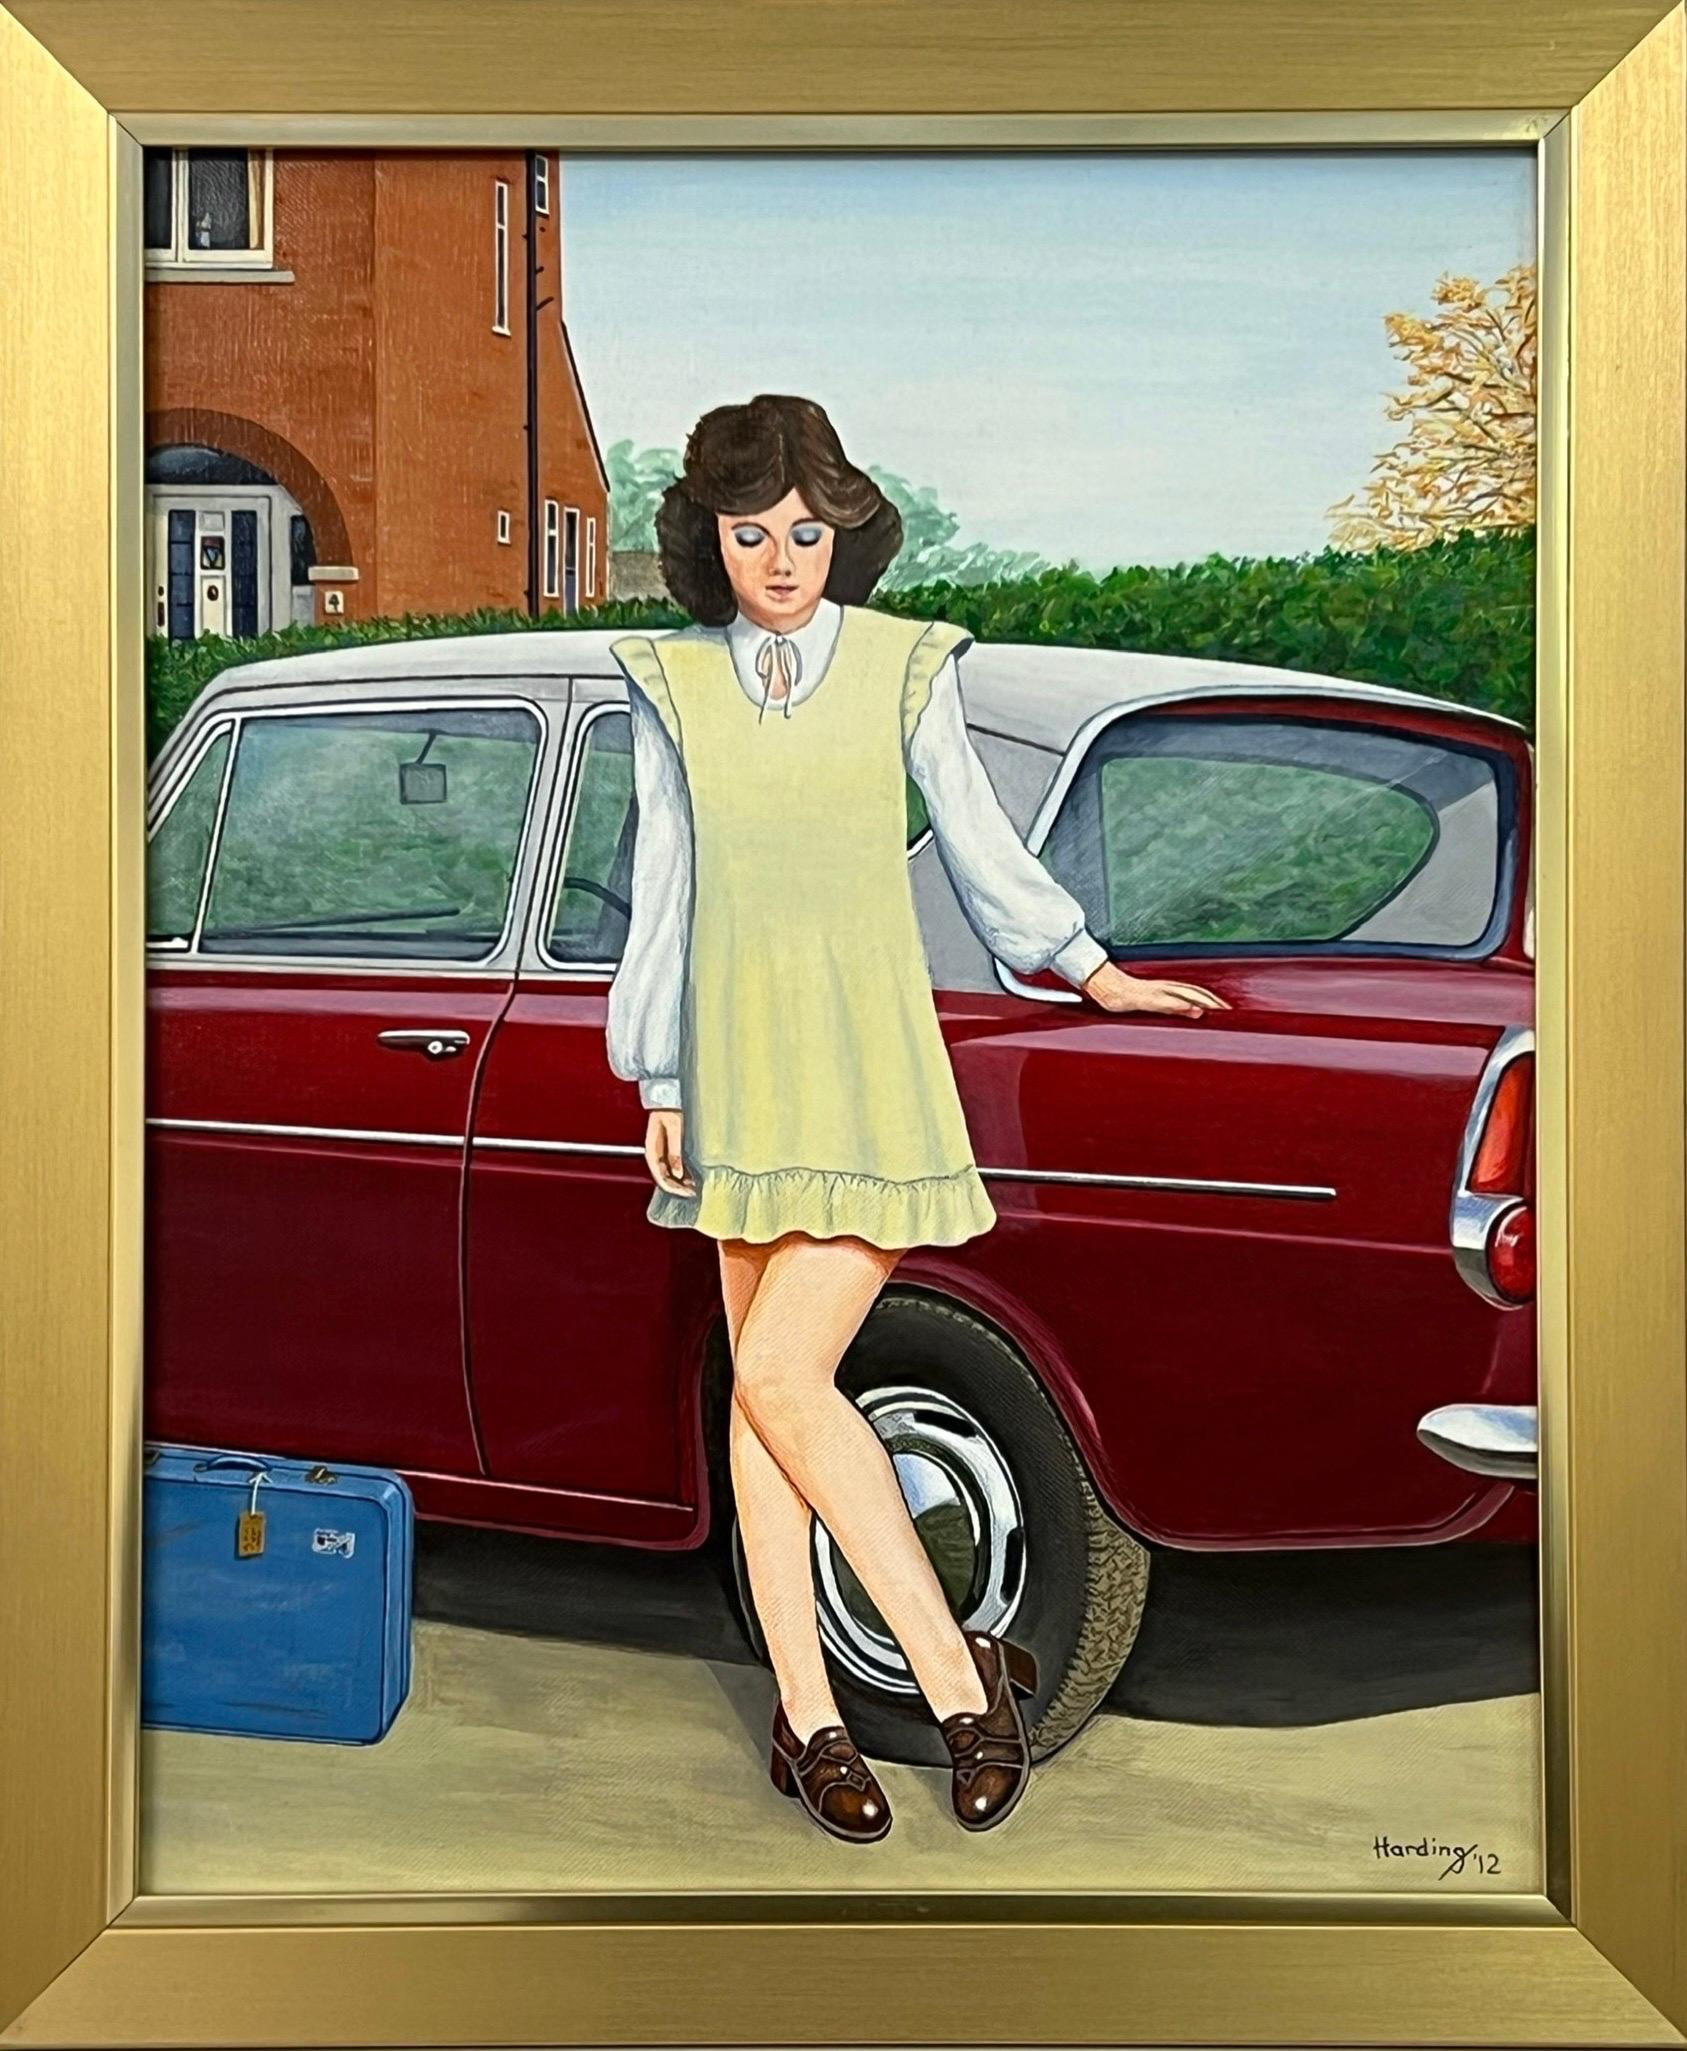 Paul F Harding Portrait Painting – Vintage Englisch Frau in Suburbia mit Classic Ford Auto 1960's 1970's England 